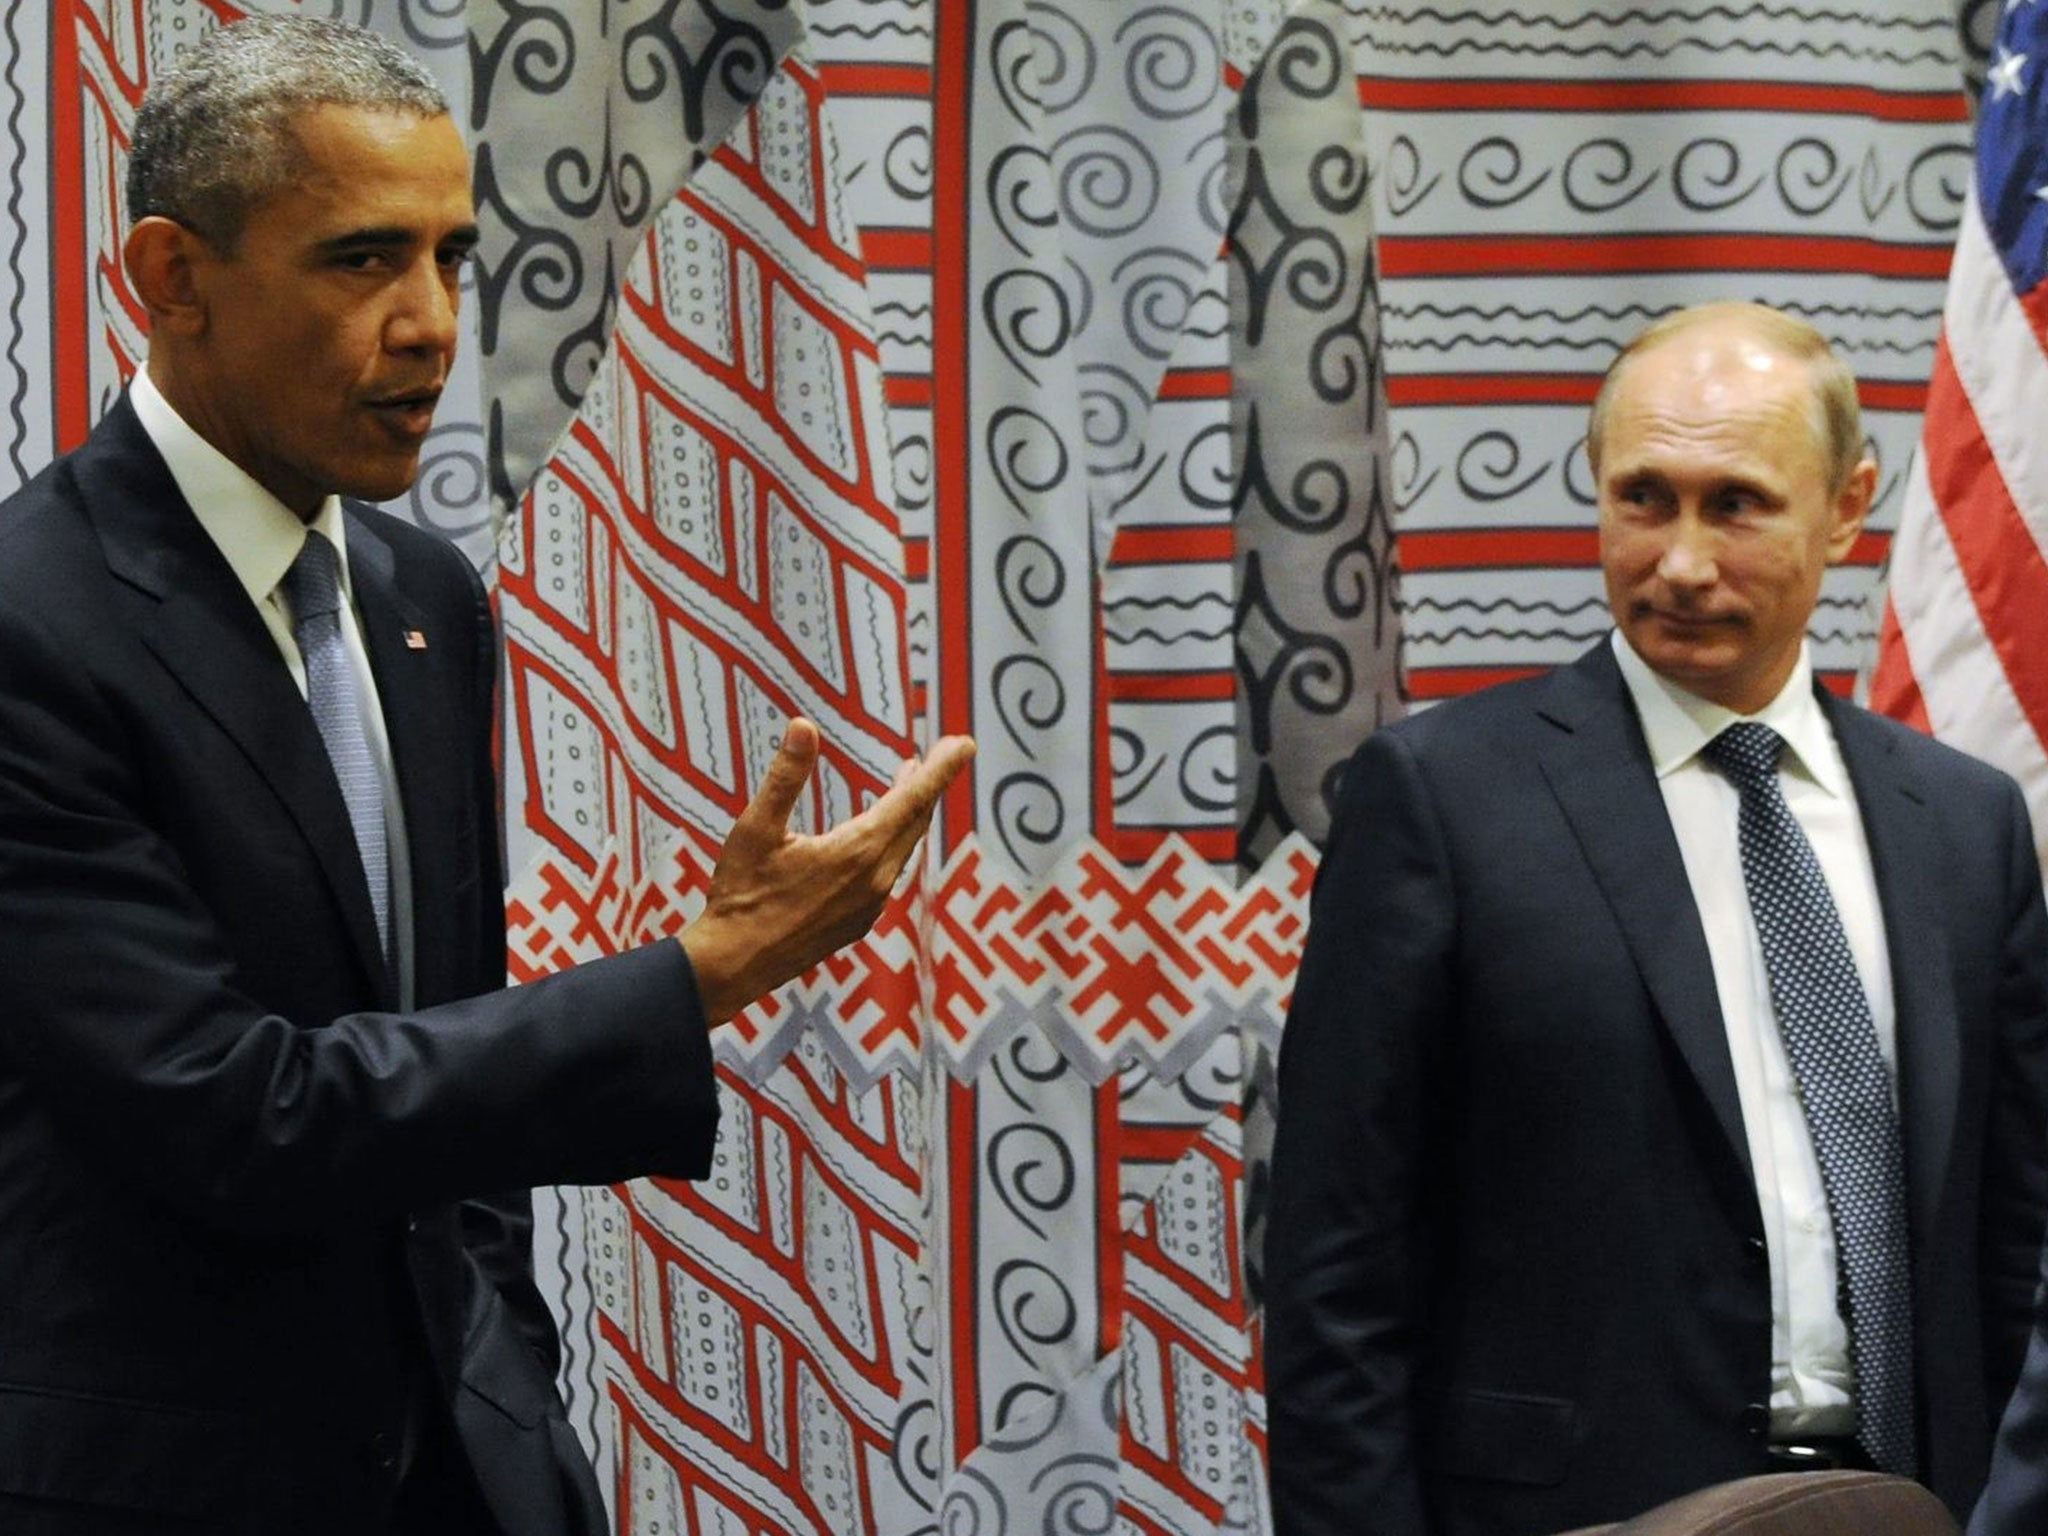 Vladimir Putin and Barack Obama have discussed the war against Isis